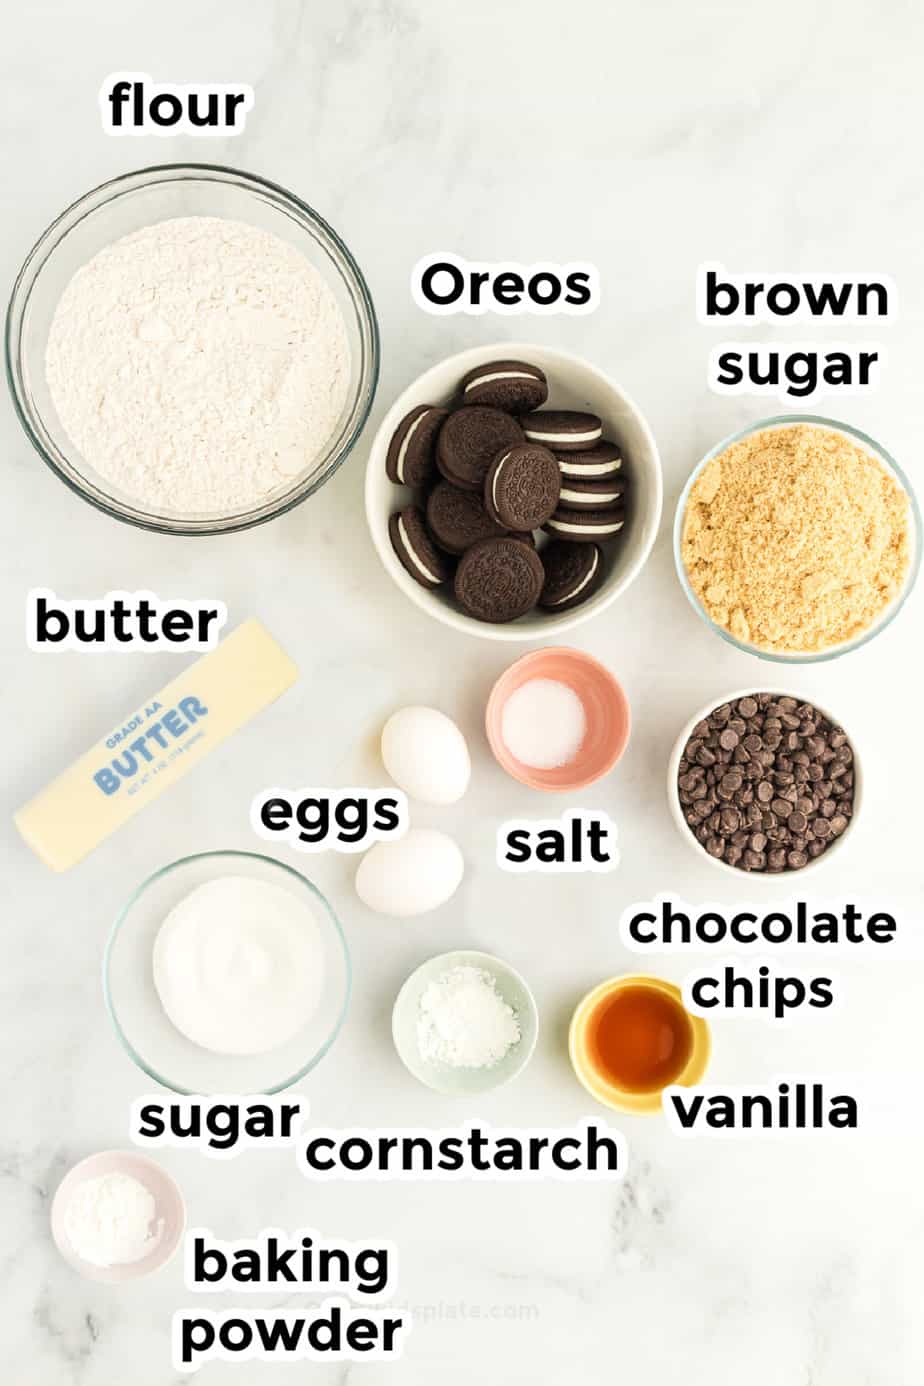 Ingredients for oreo stuffed chocolate chip cookies in bowls on a counter from overhead with text labels.